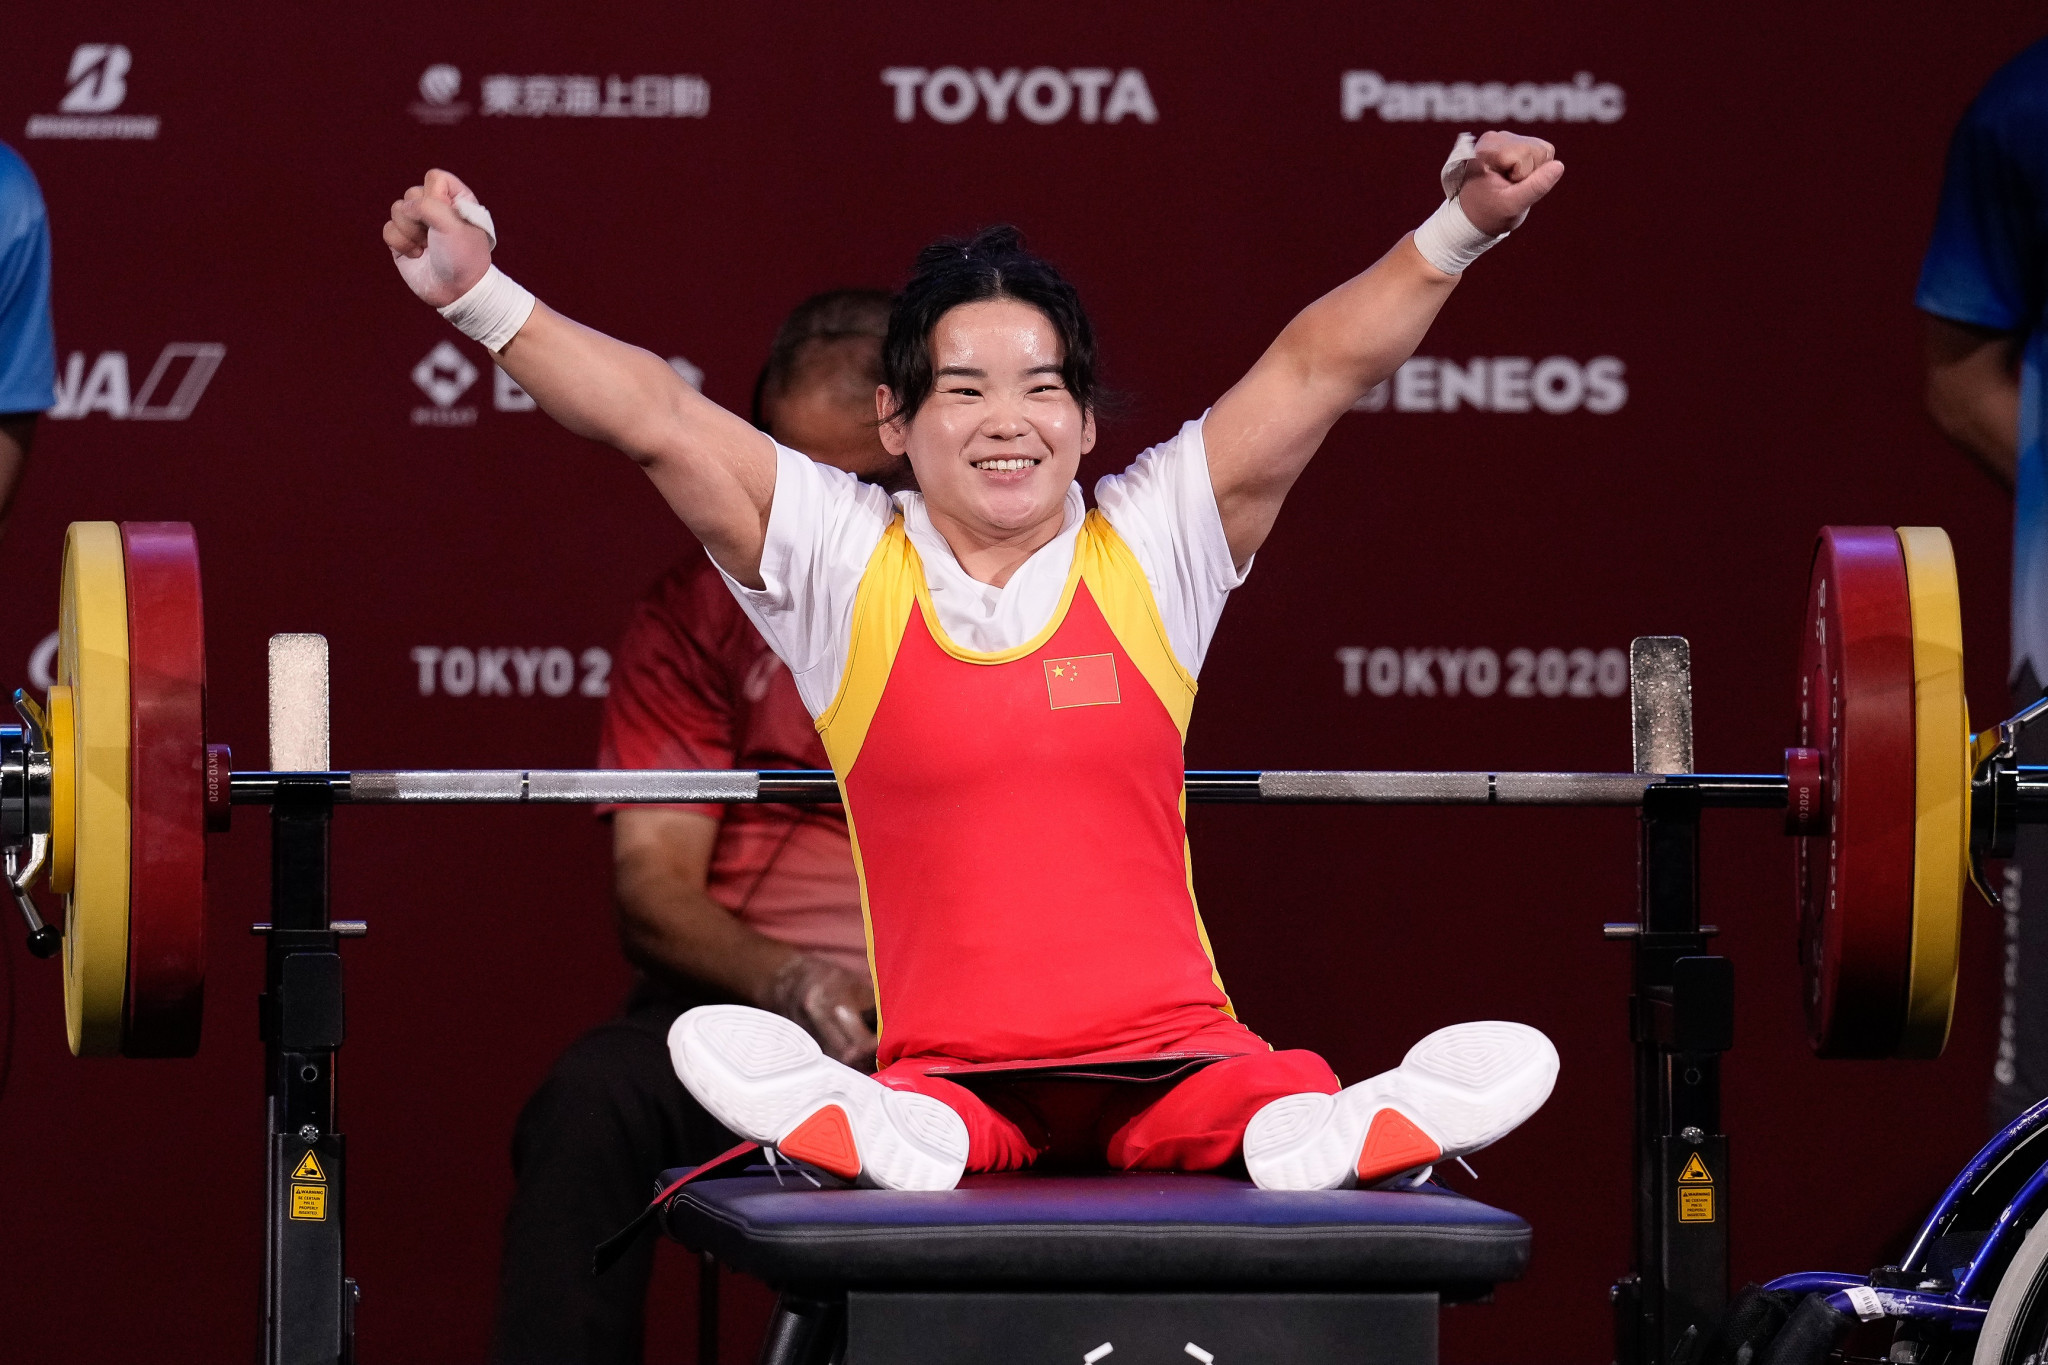 Guo breaks own record to win gold at World Para Powerlifting Championships